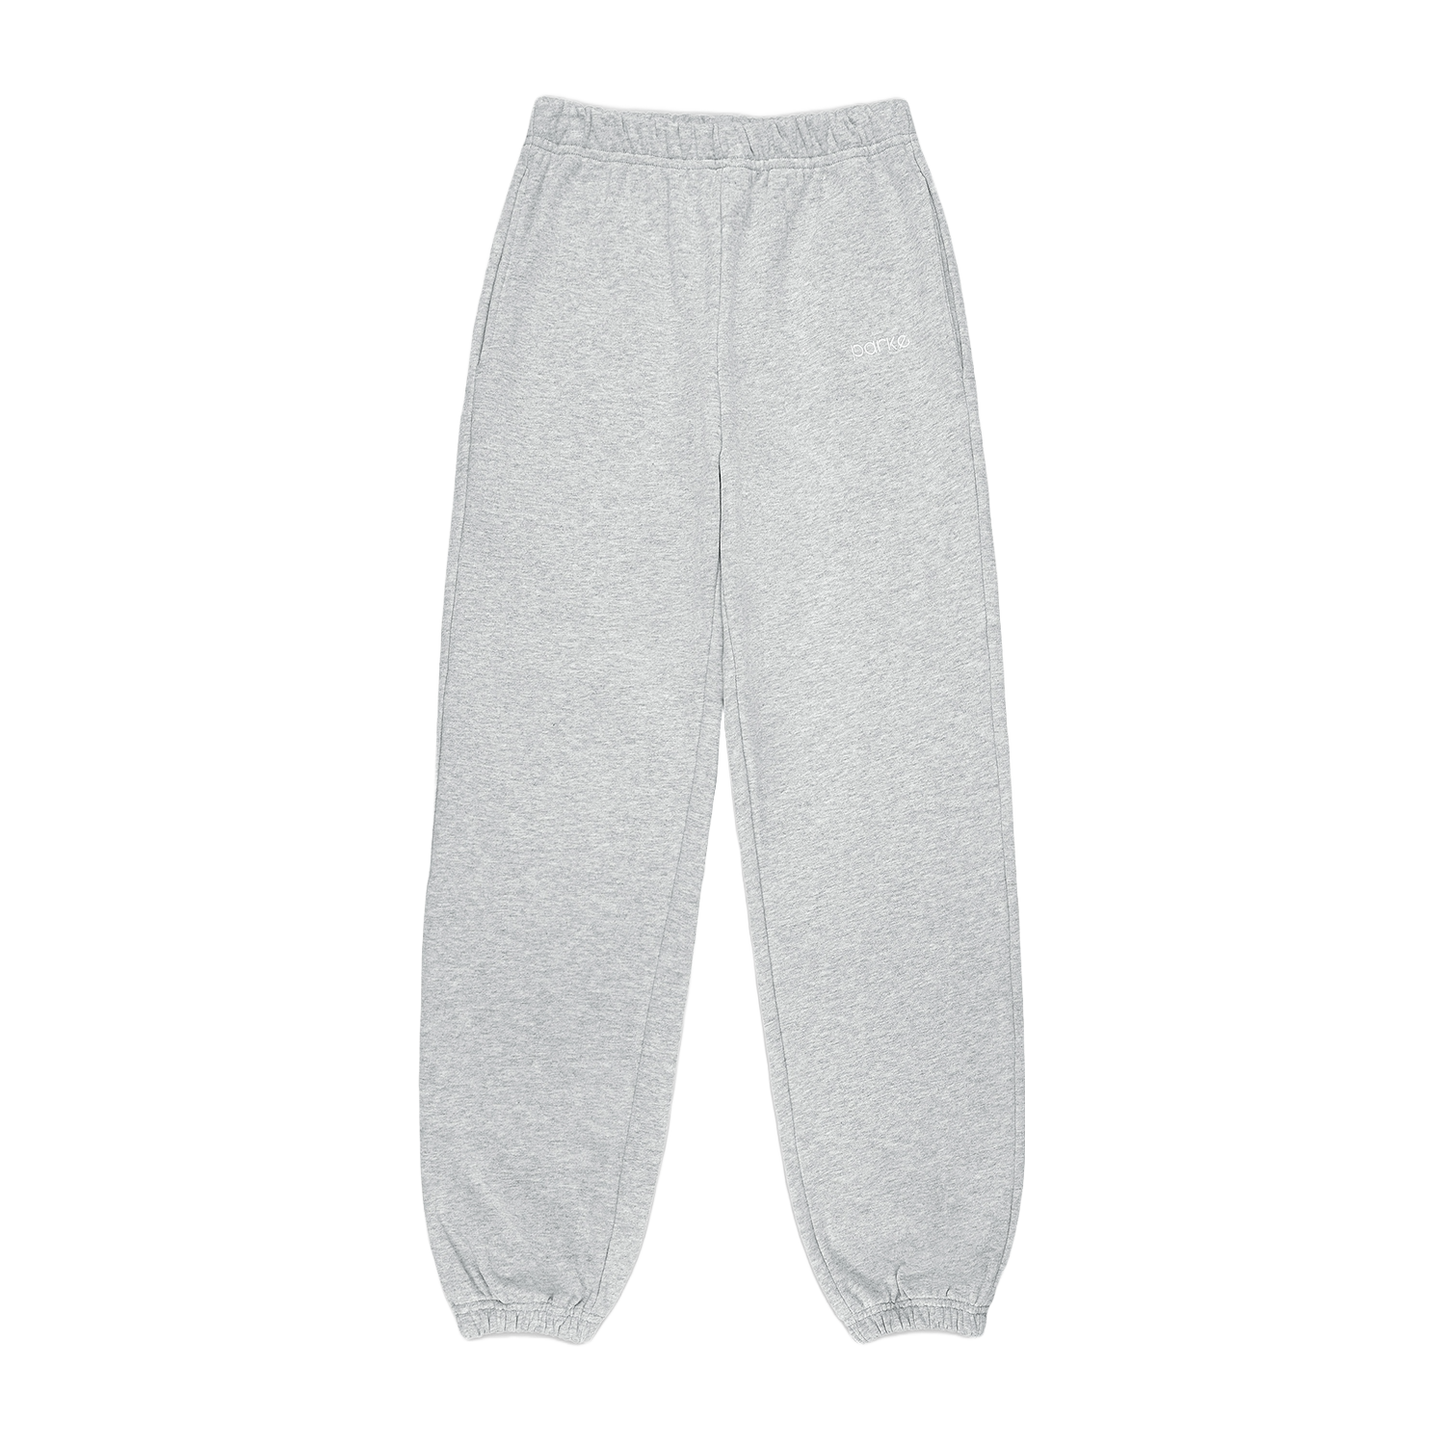 Embroidered Unisex Sweats